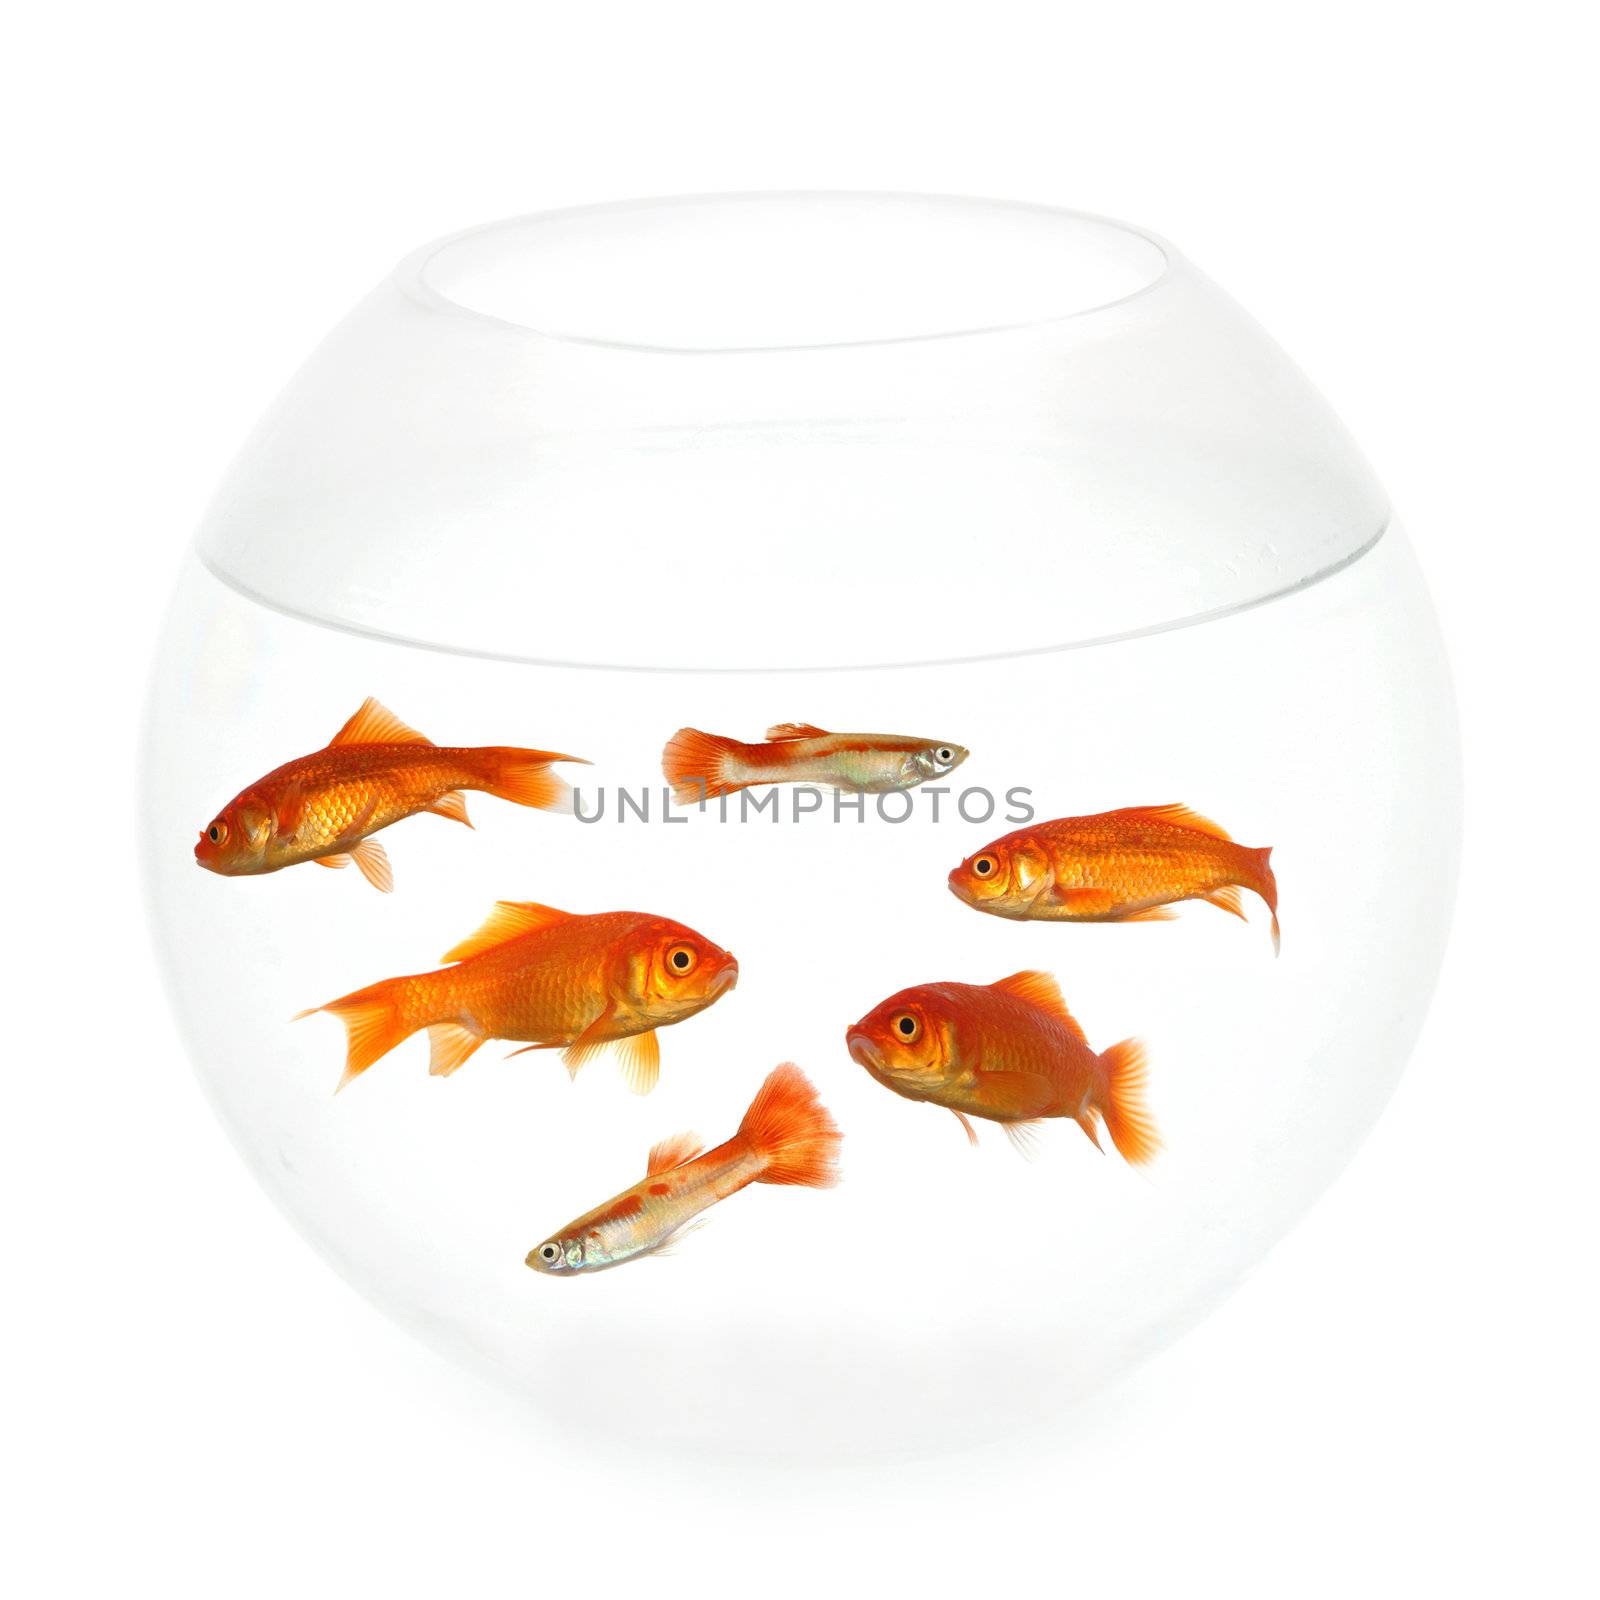 Goldfish swimming in a fishbowl. Taken on clean white background.